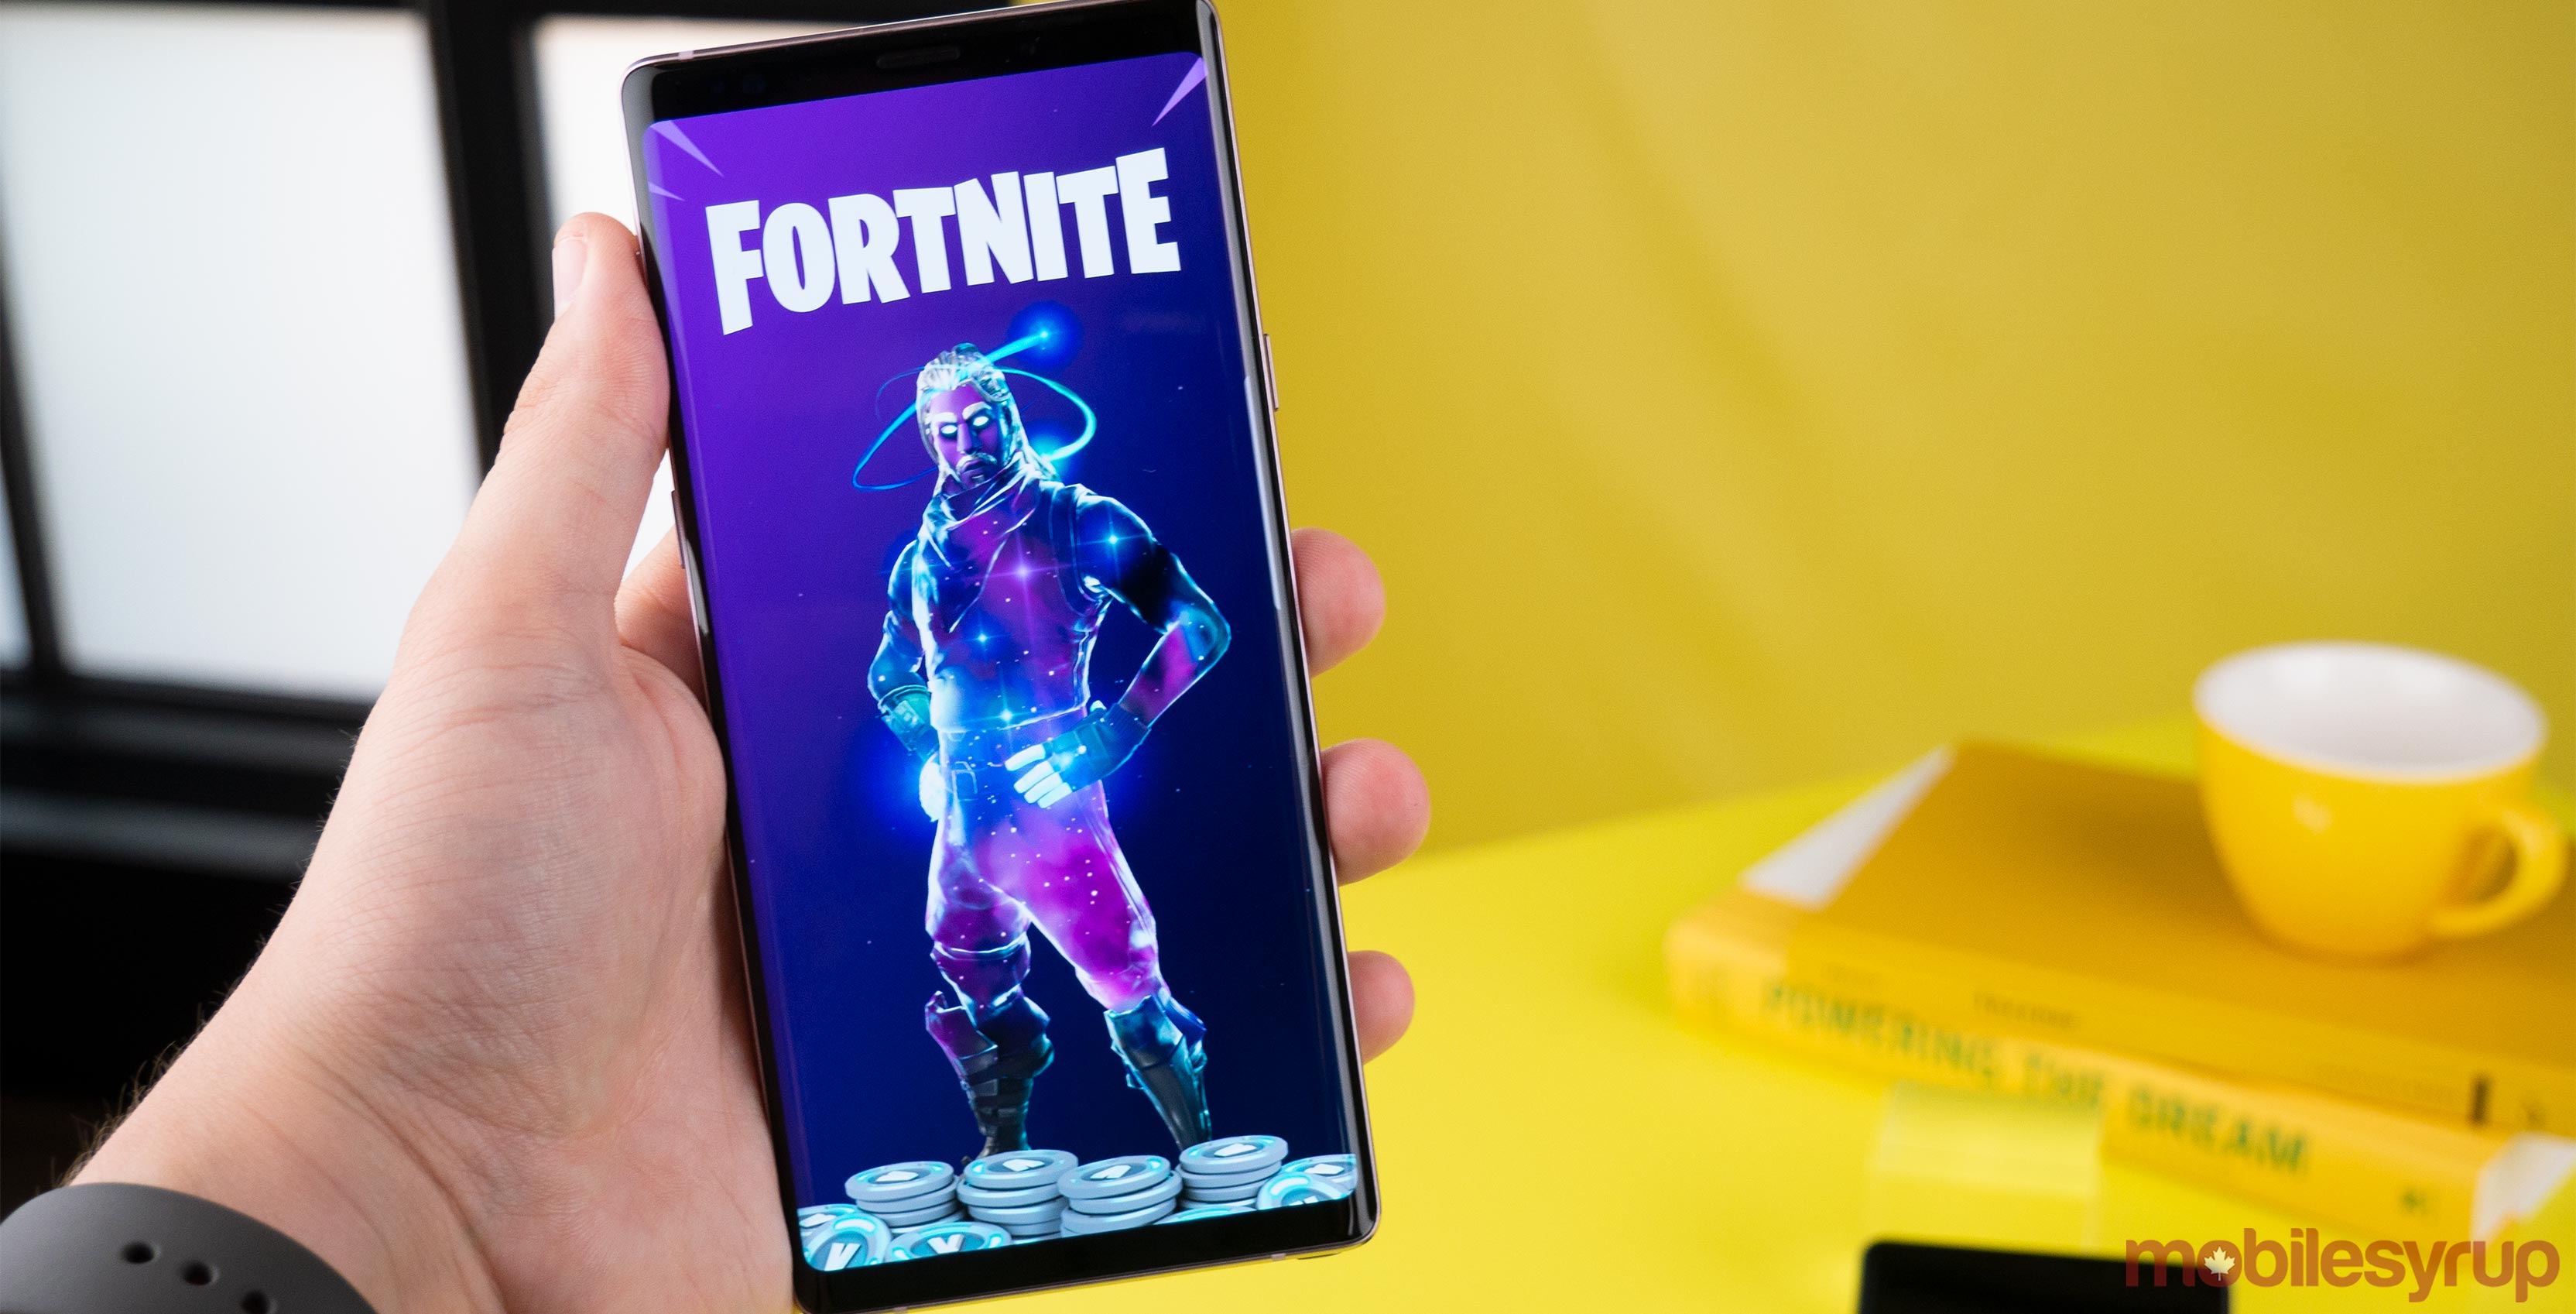 Fortnite galaxy skin delivered in 24 hours Fortnite Launch t - 3328 x 1697 jpeg 431kB